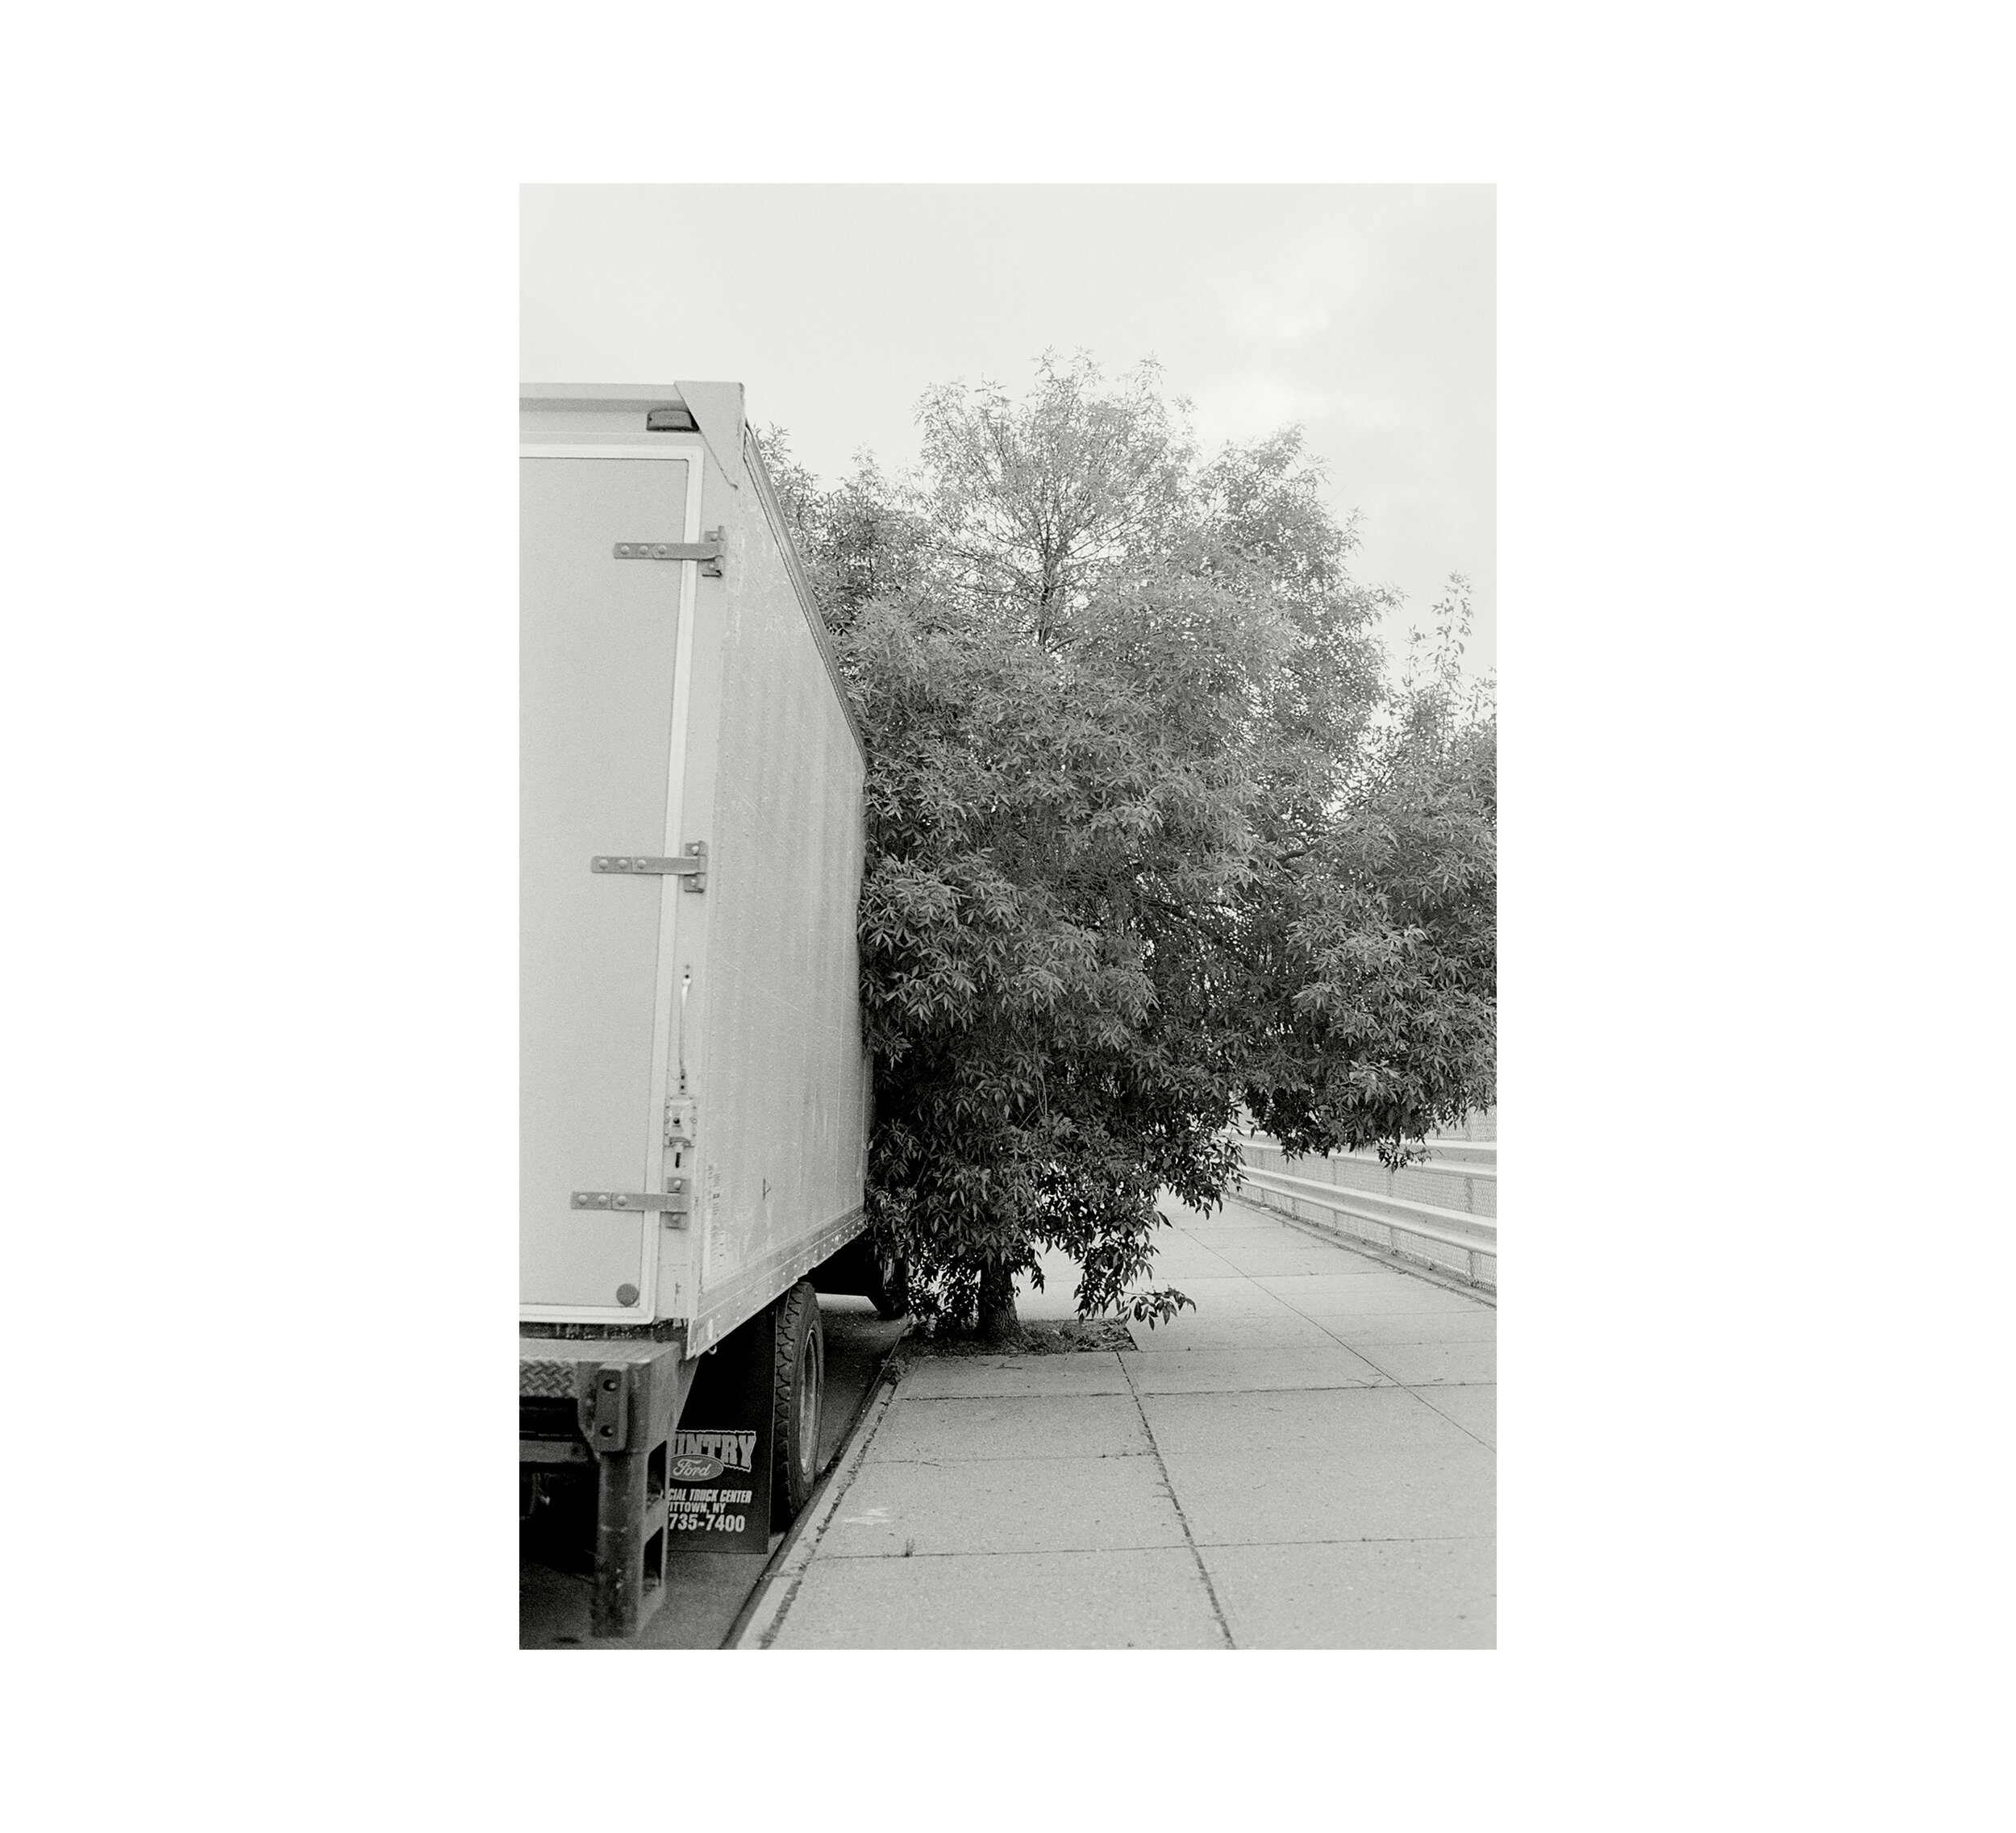   Tree On Stagg , 2013 gelatin silver print image 6 1/2 x 4 3/8 in paper 10 x 8 in 